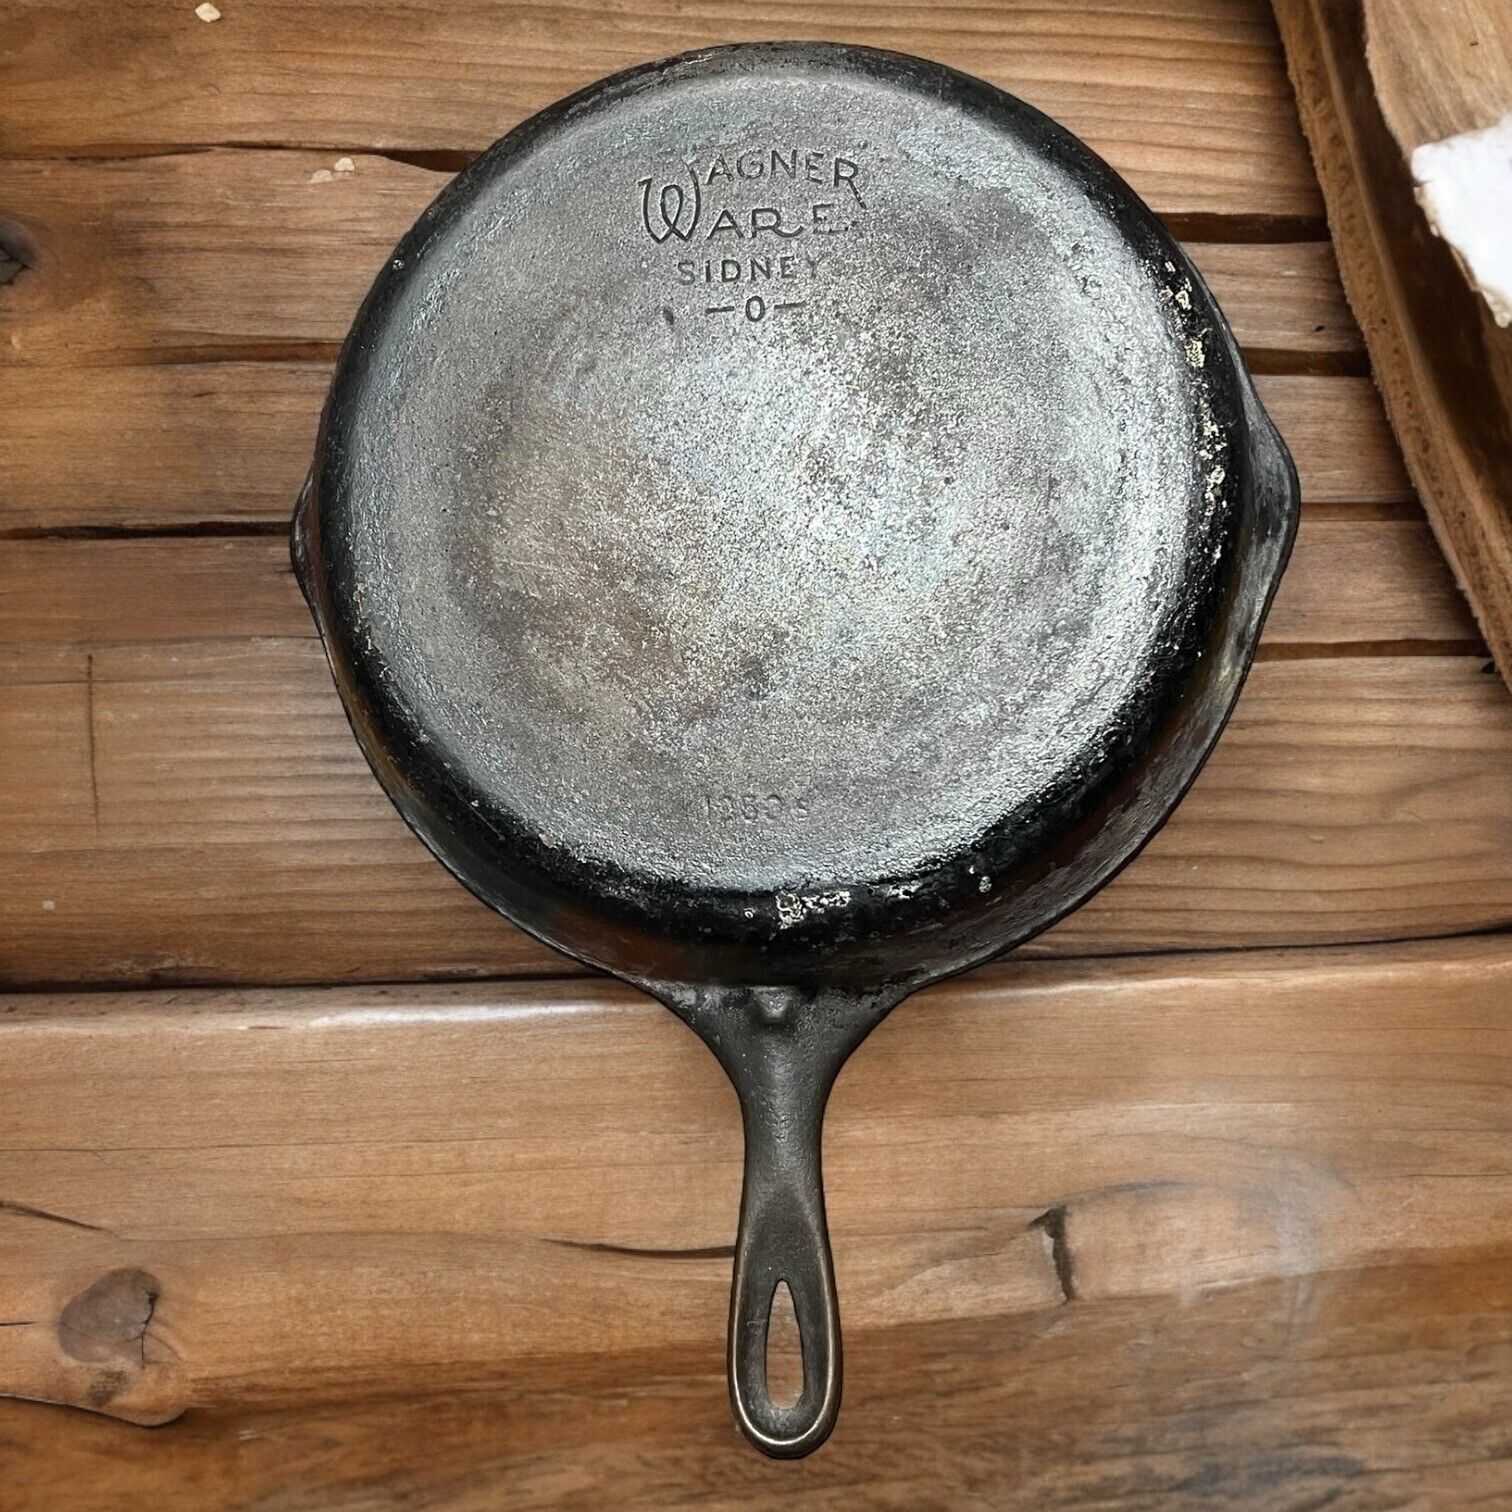 VINTAGE # 10 WAGNER WARE CAST IRON COOKING DOUBLE SPOUT SKILLET FRYING PAN 11.5”